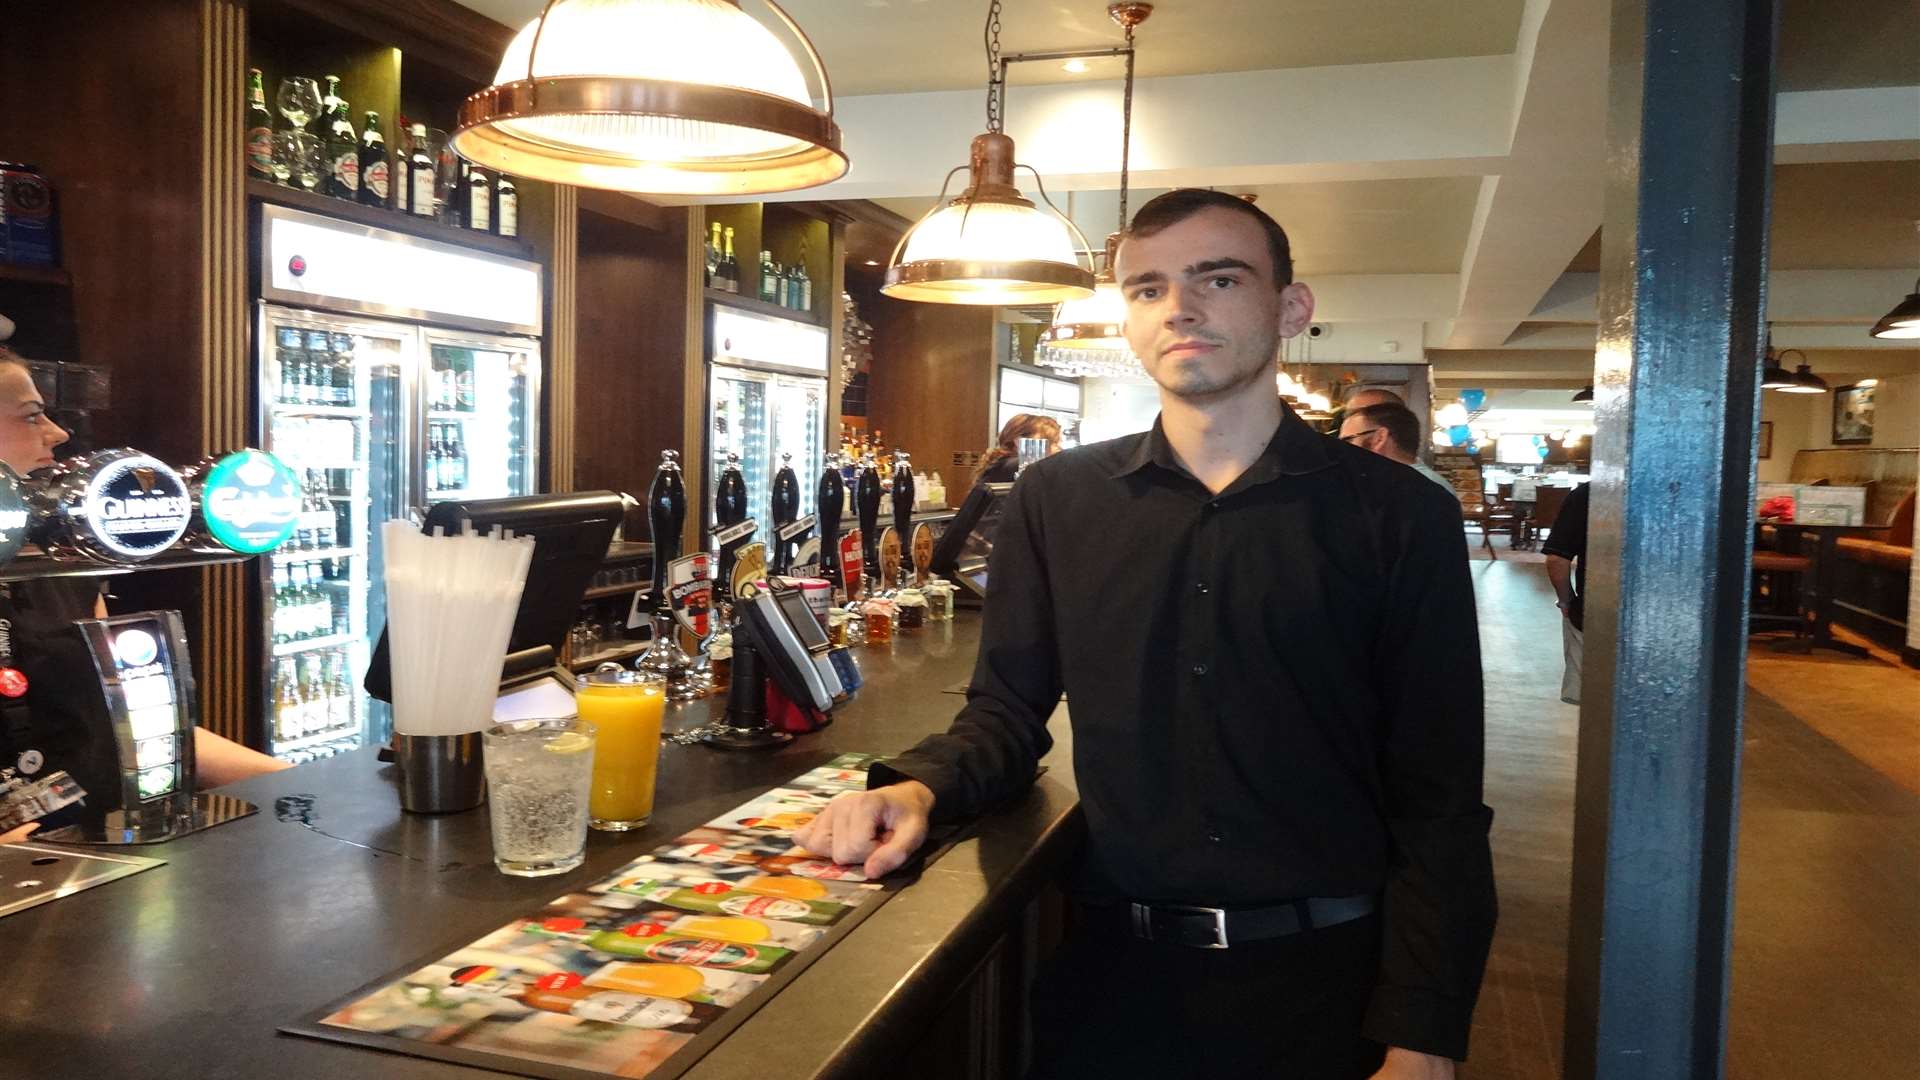 David Rowe was first in the queue at Sheppey's new Wetherspoon pub